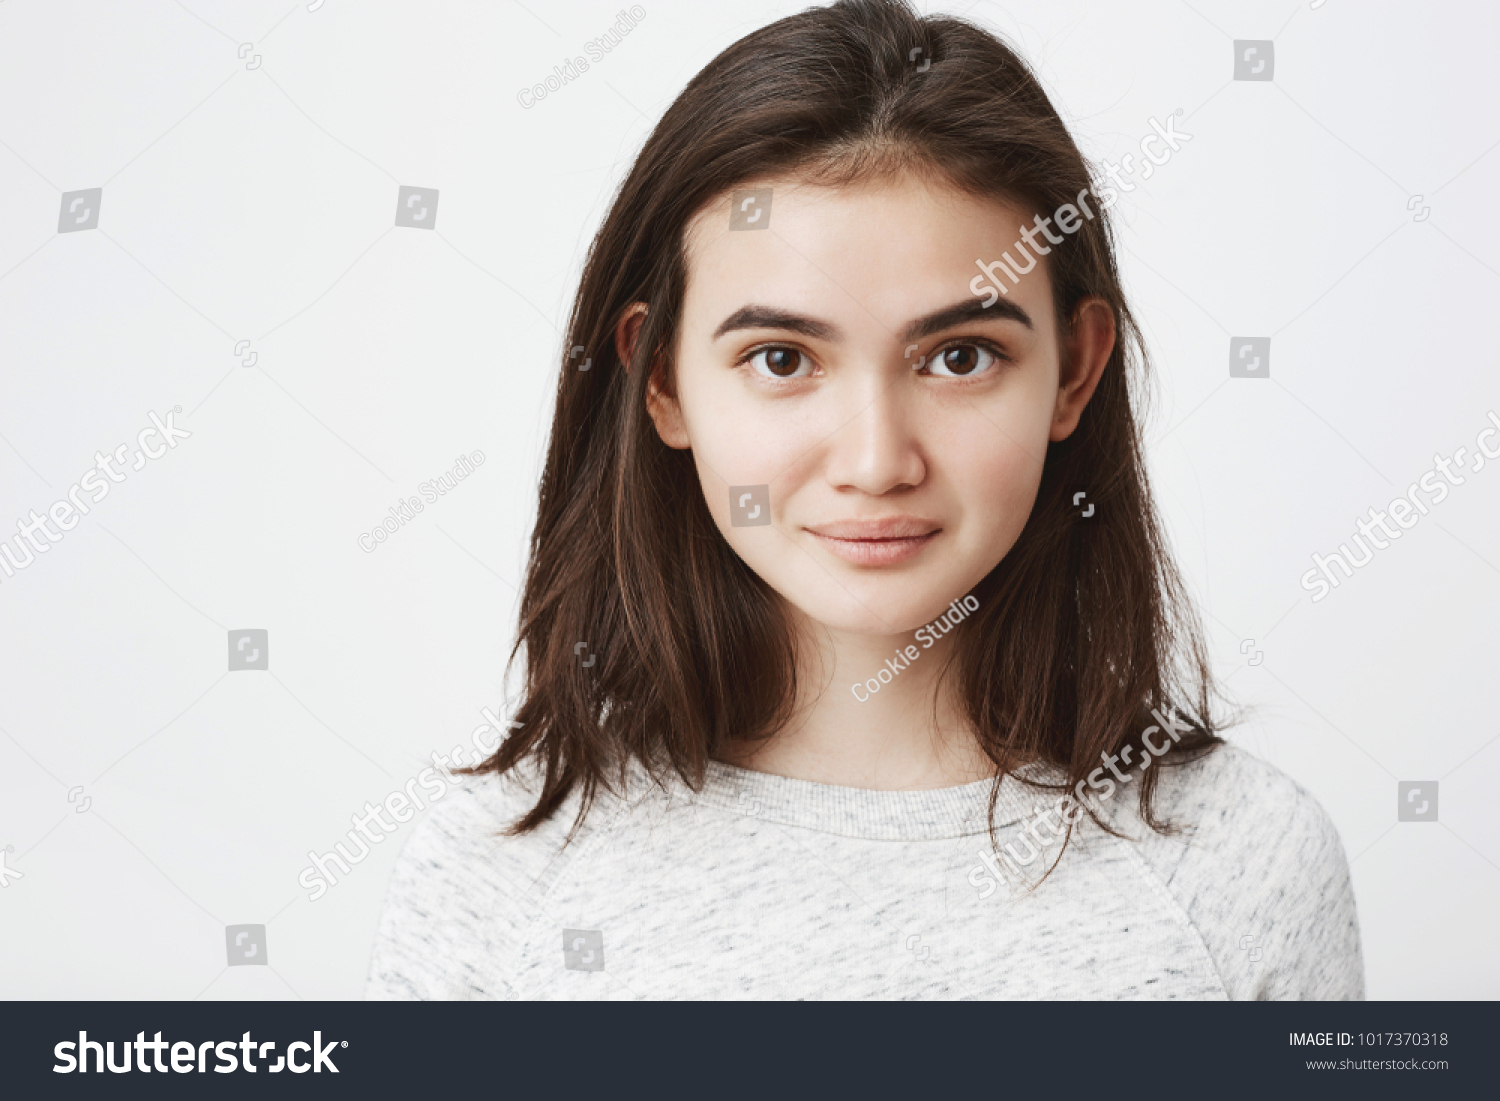 Portrait of cute naive european lop-eared girl with cute smile and mysterious look, over white background. Beautiful brunette makes photo for her profile in social network #1017370318